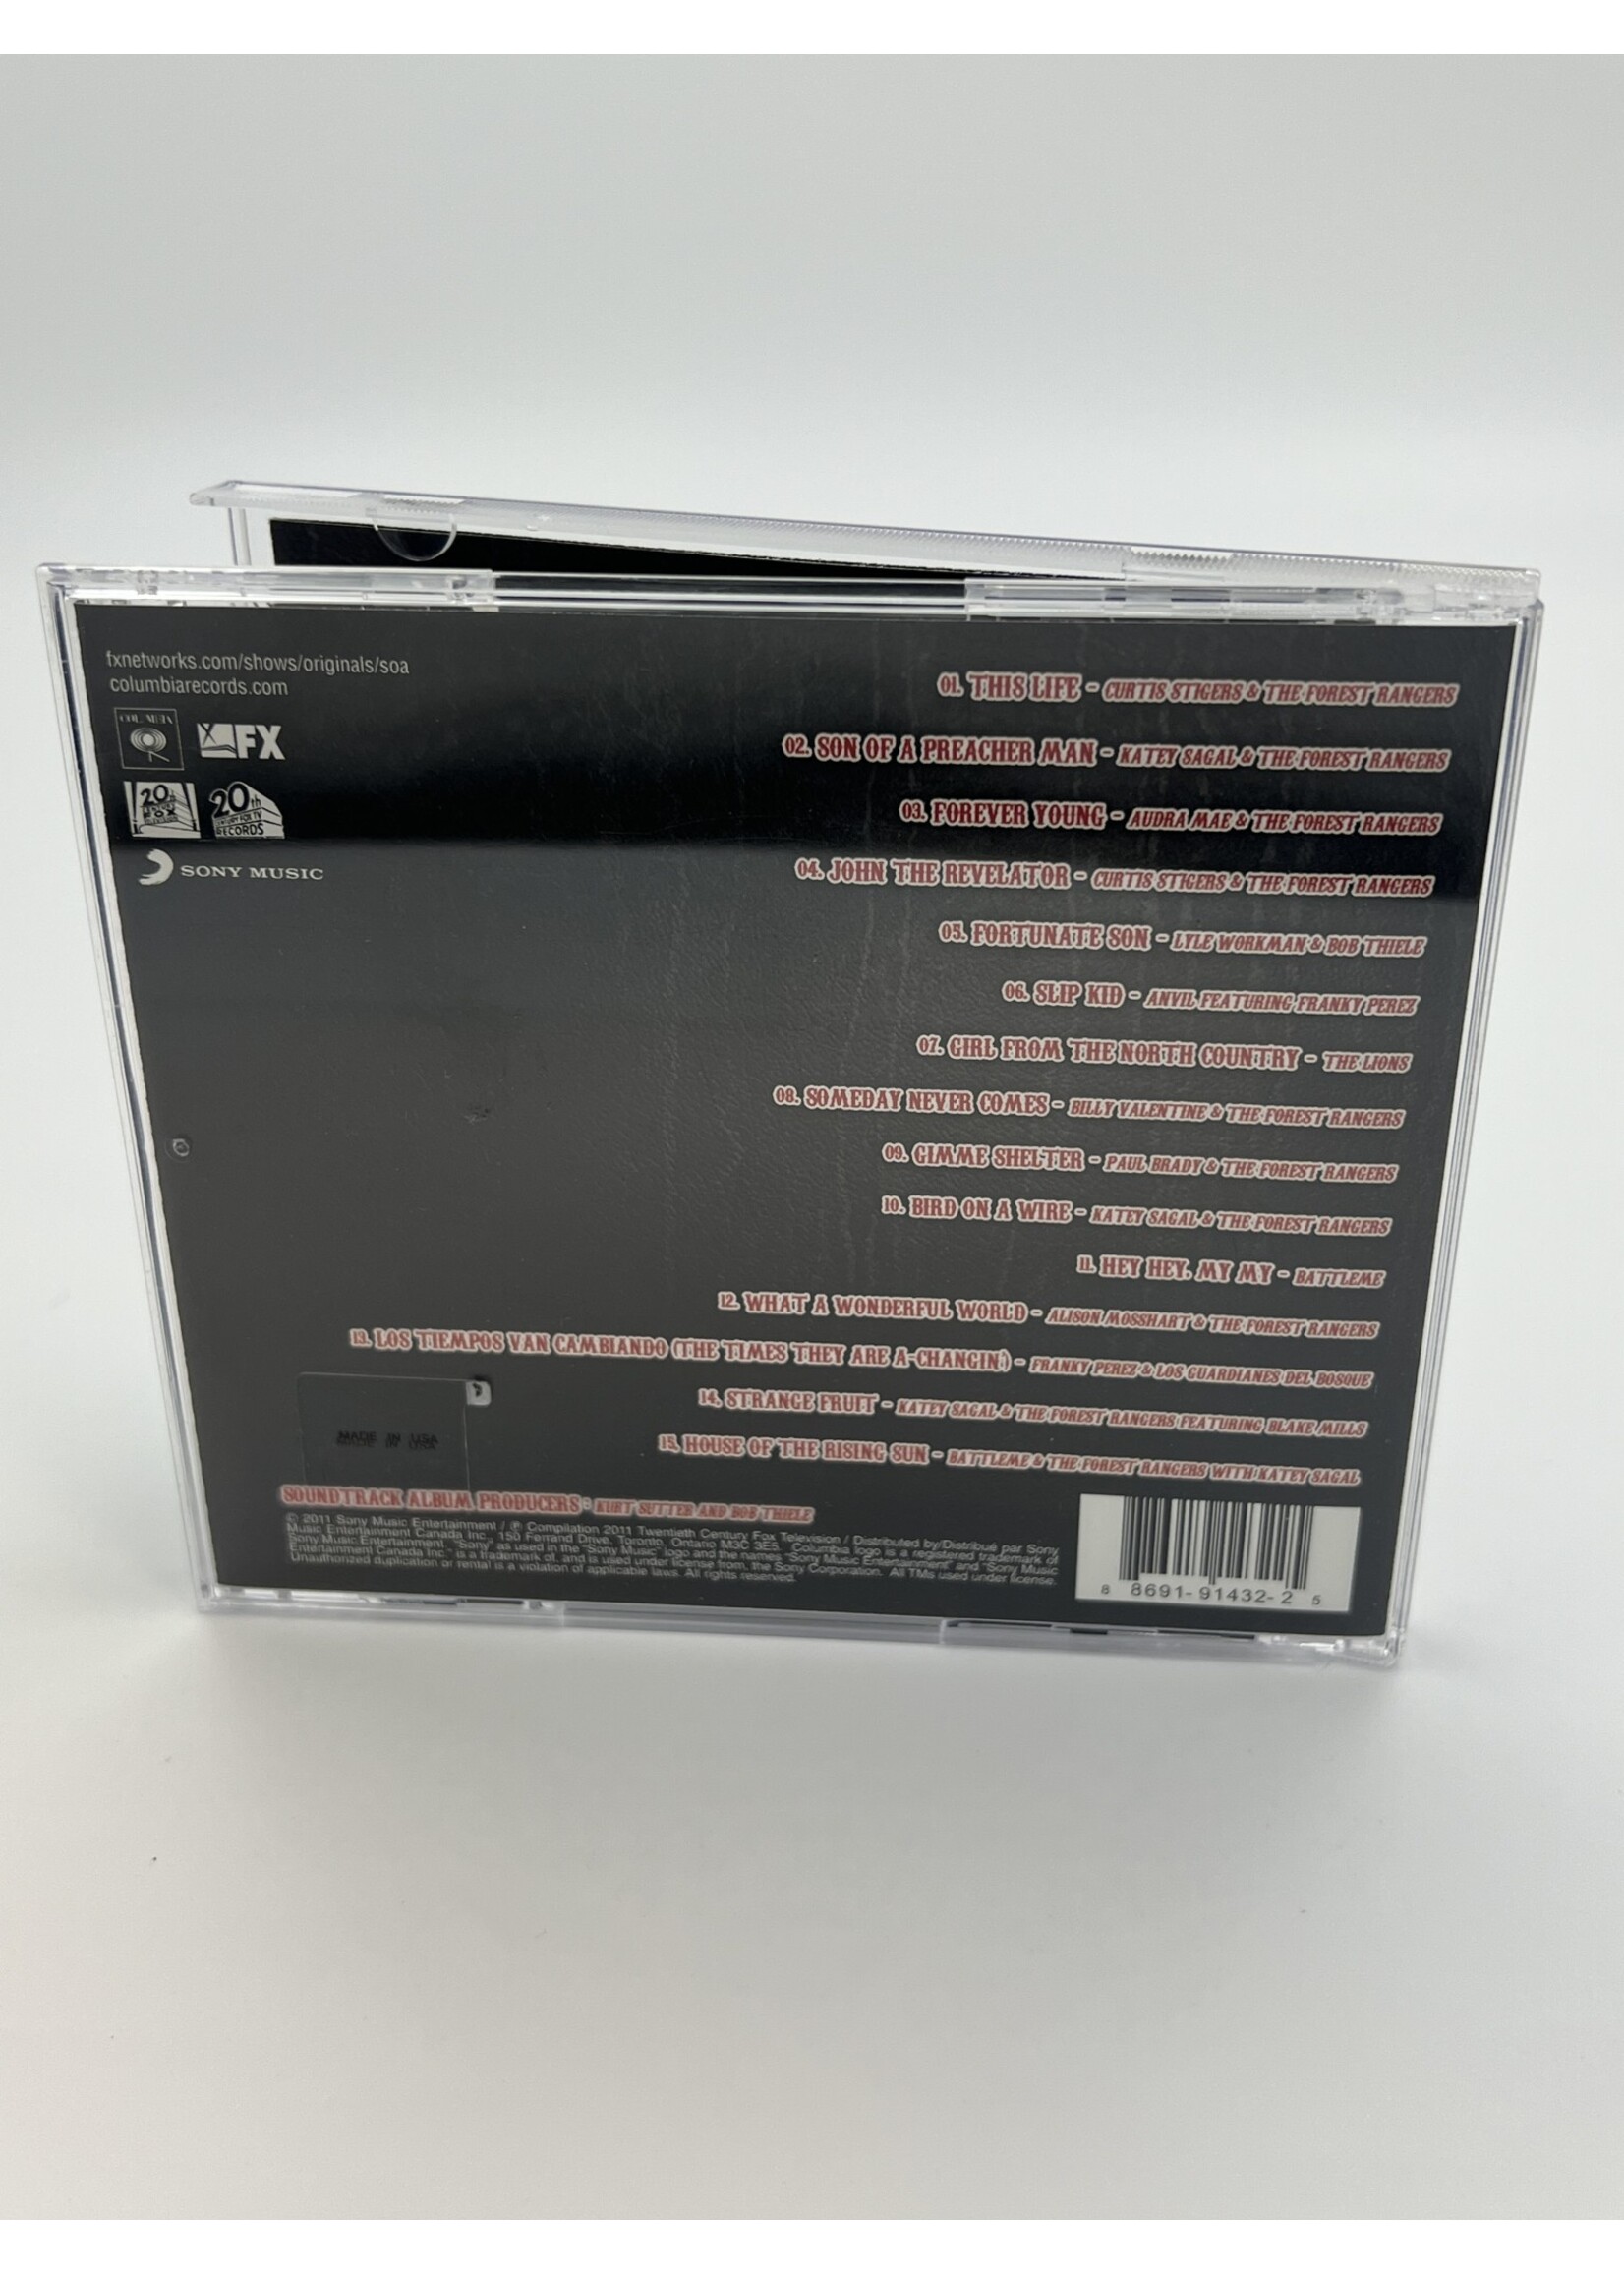 CD   Songs Of Anarchy Music From Sons Of Anarchy Seasons 1 To 4 CD